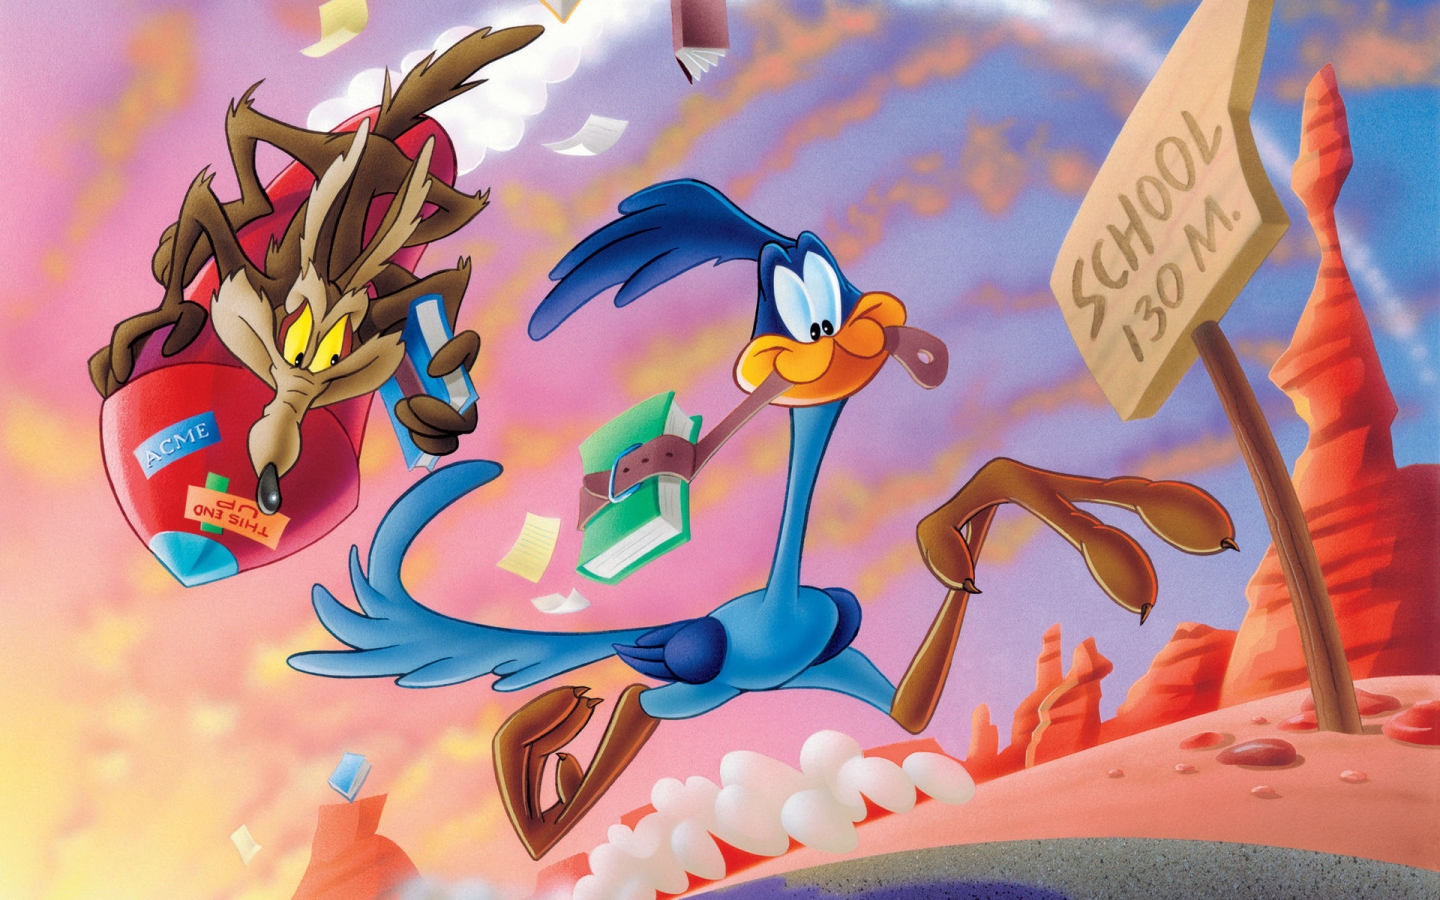 Coyote and Roadrunner for 1440 x 900 widescreen resolution